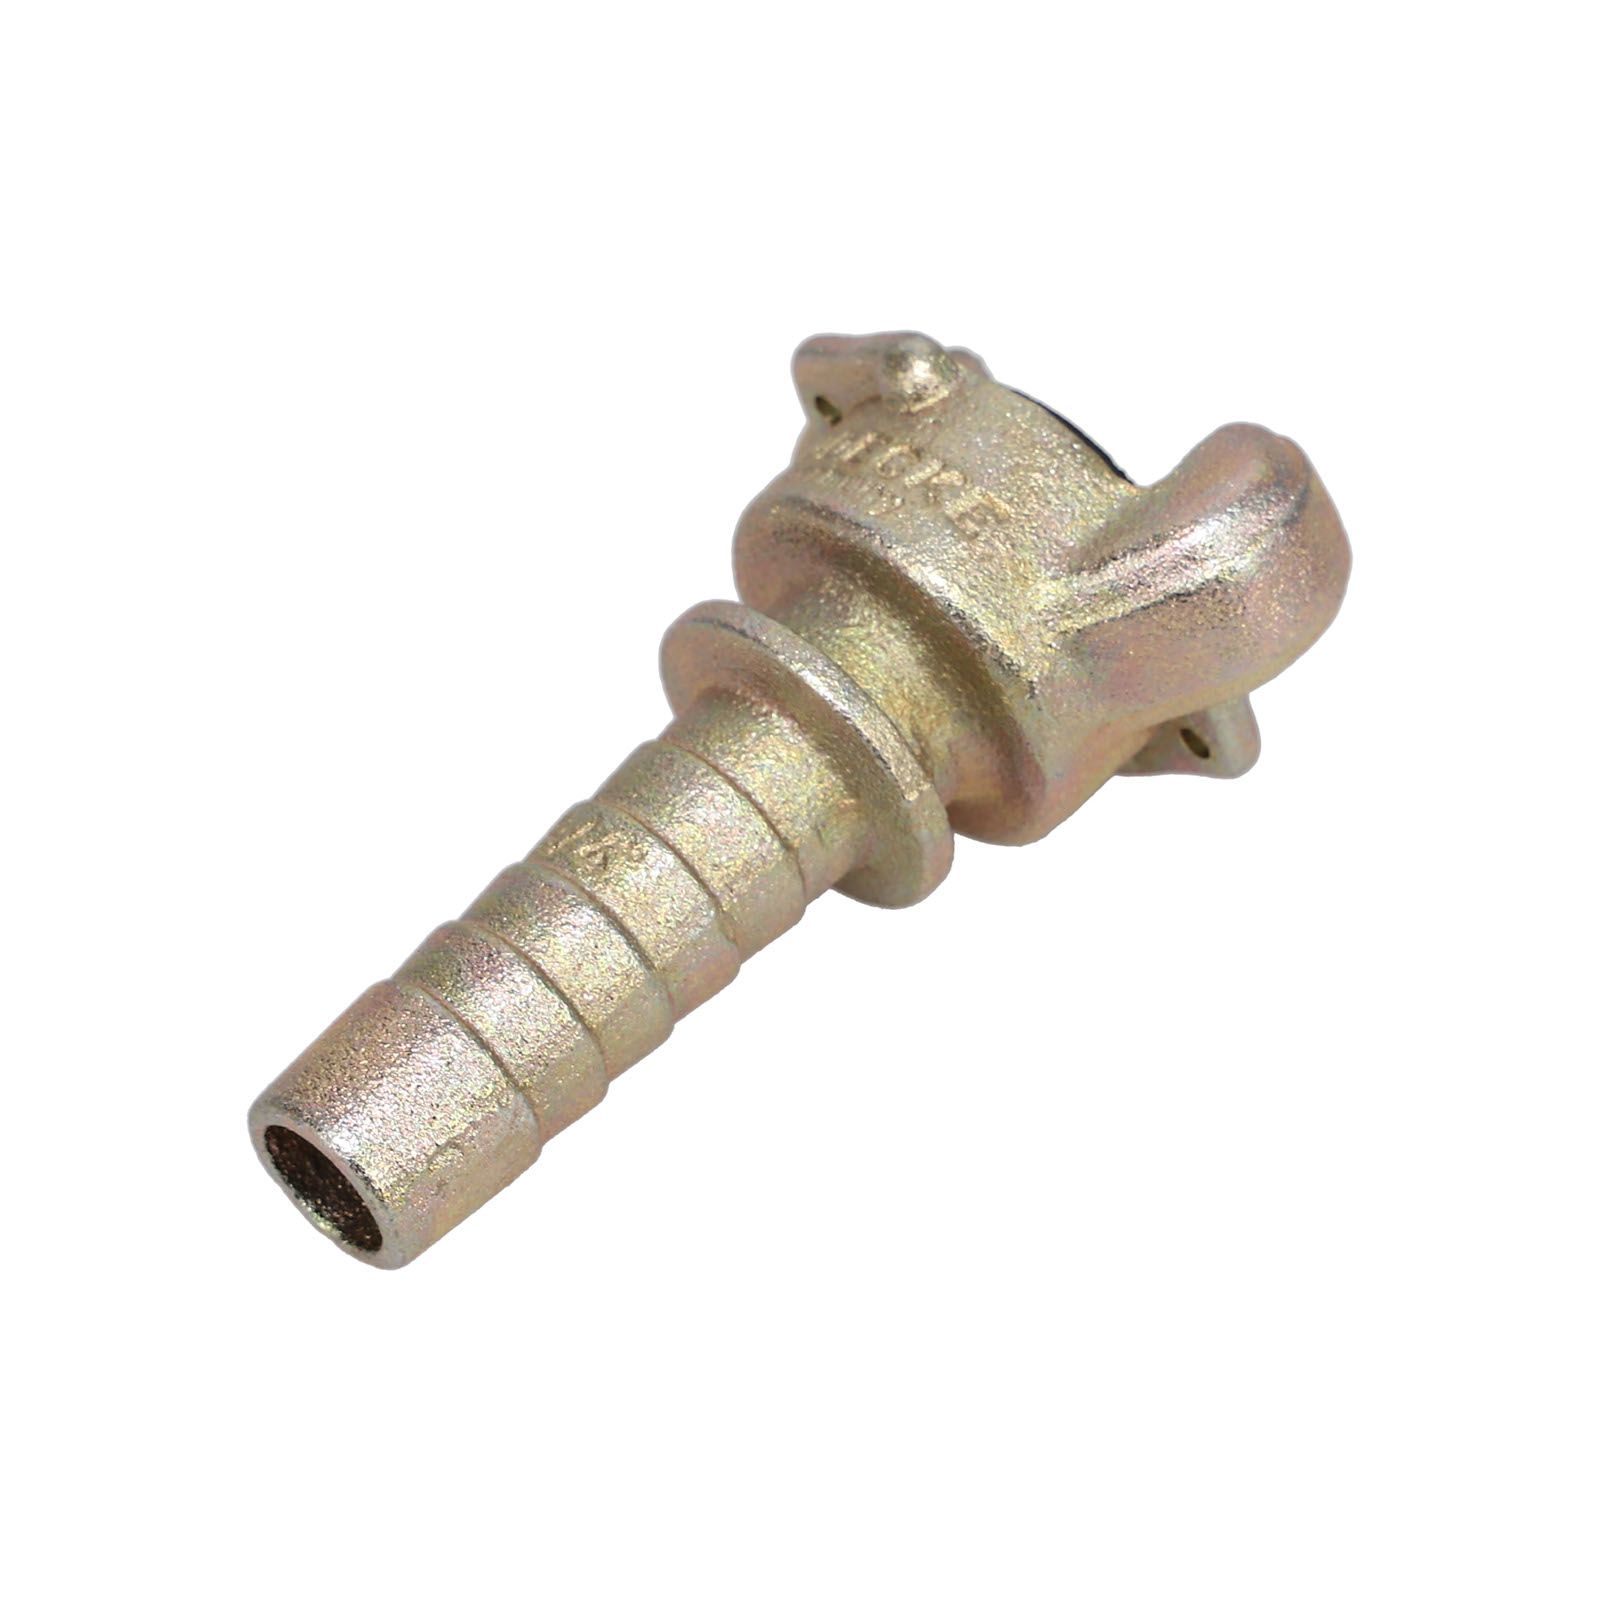 CASTED US CLAW COUPLING 3/4INCH (HN) foto do produto